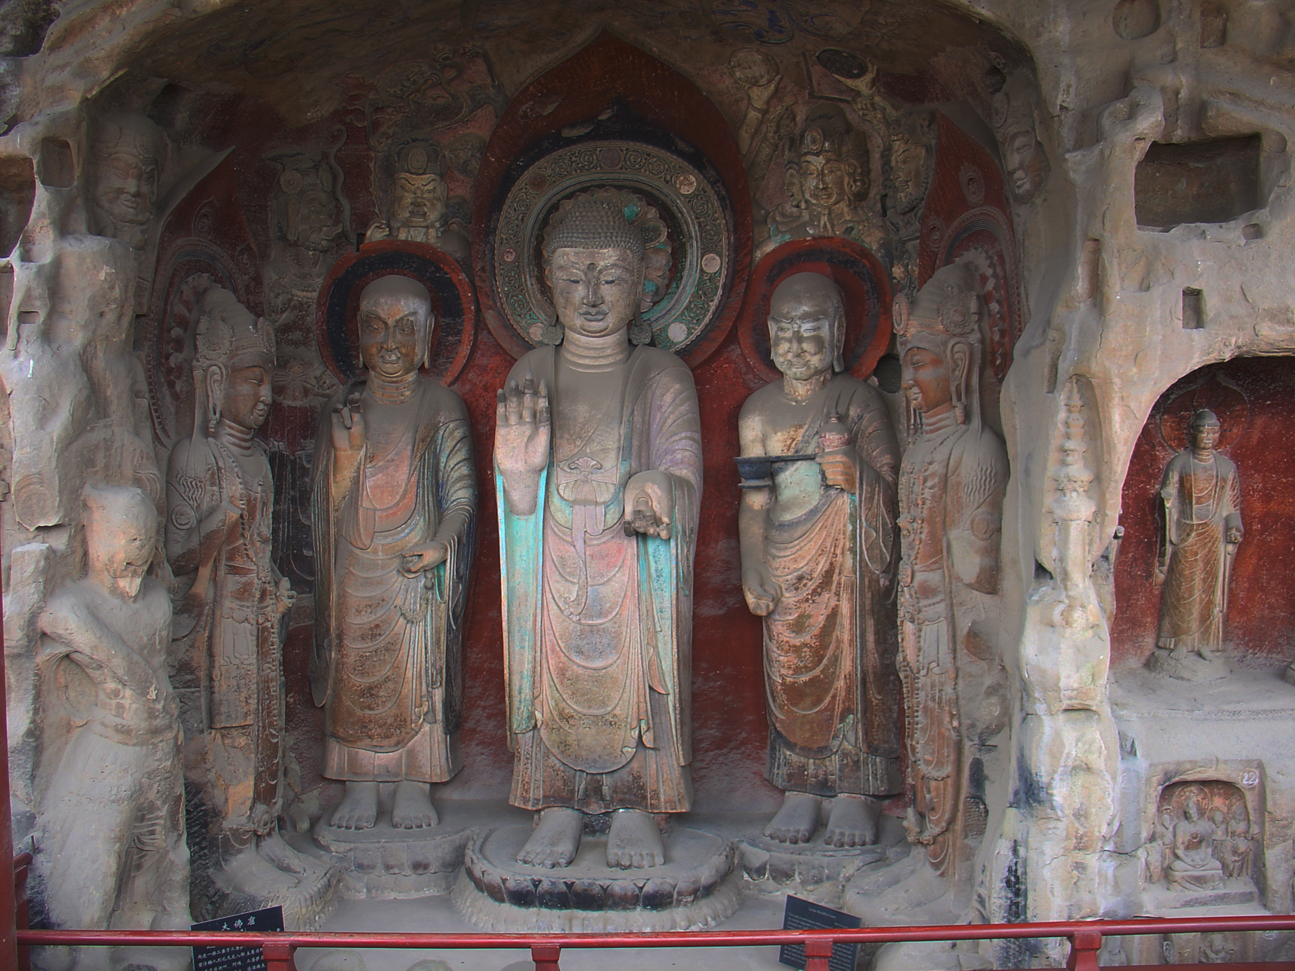 The huge statues, carved in to the mountain